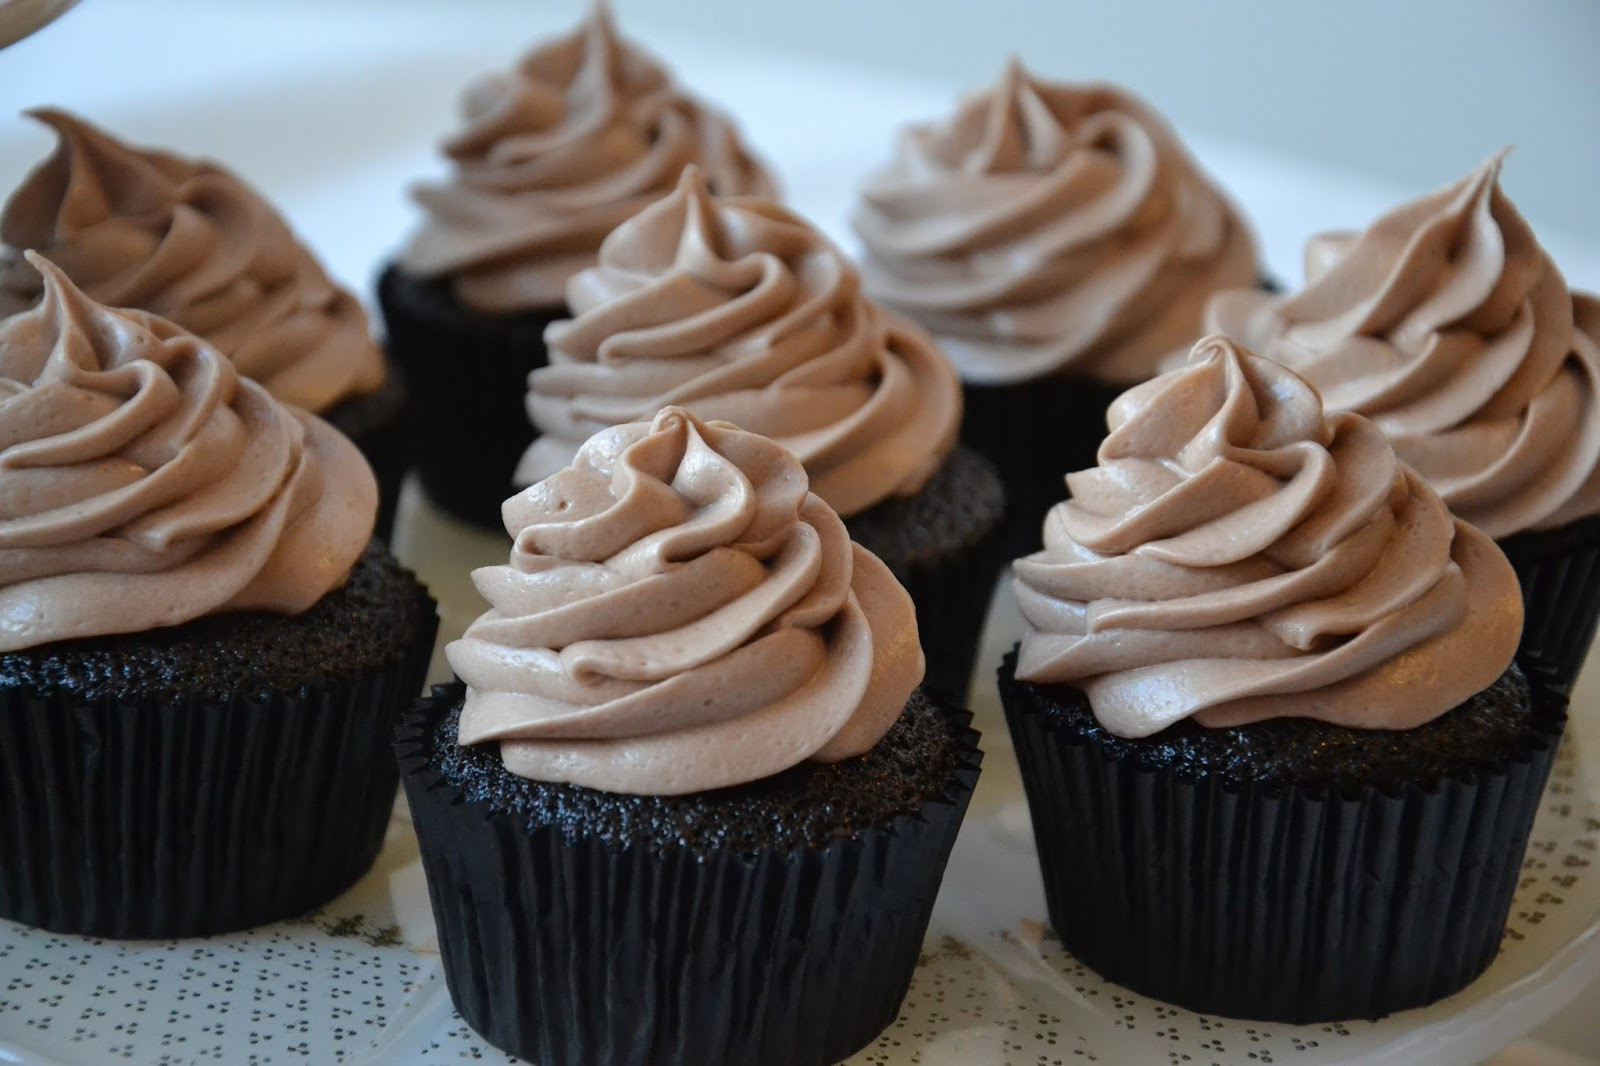 Chocolate Cupcakes With Cream Cheese Filling
 The Sugary Shrink Chocolate Cream Cheese Cupcakes